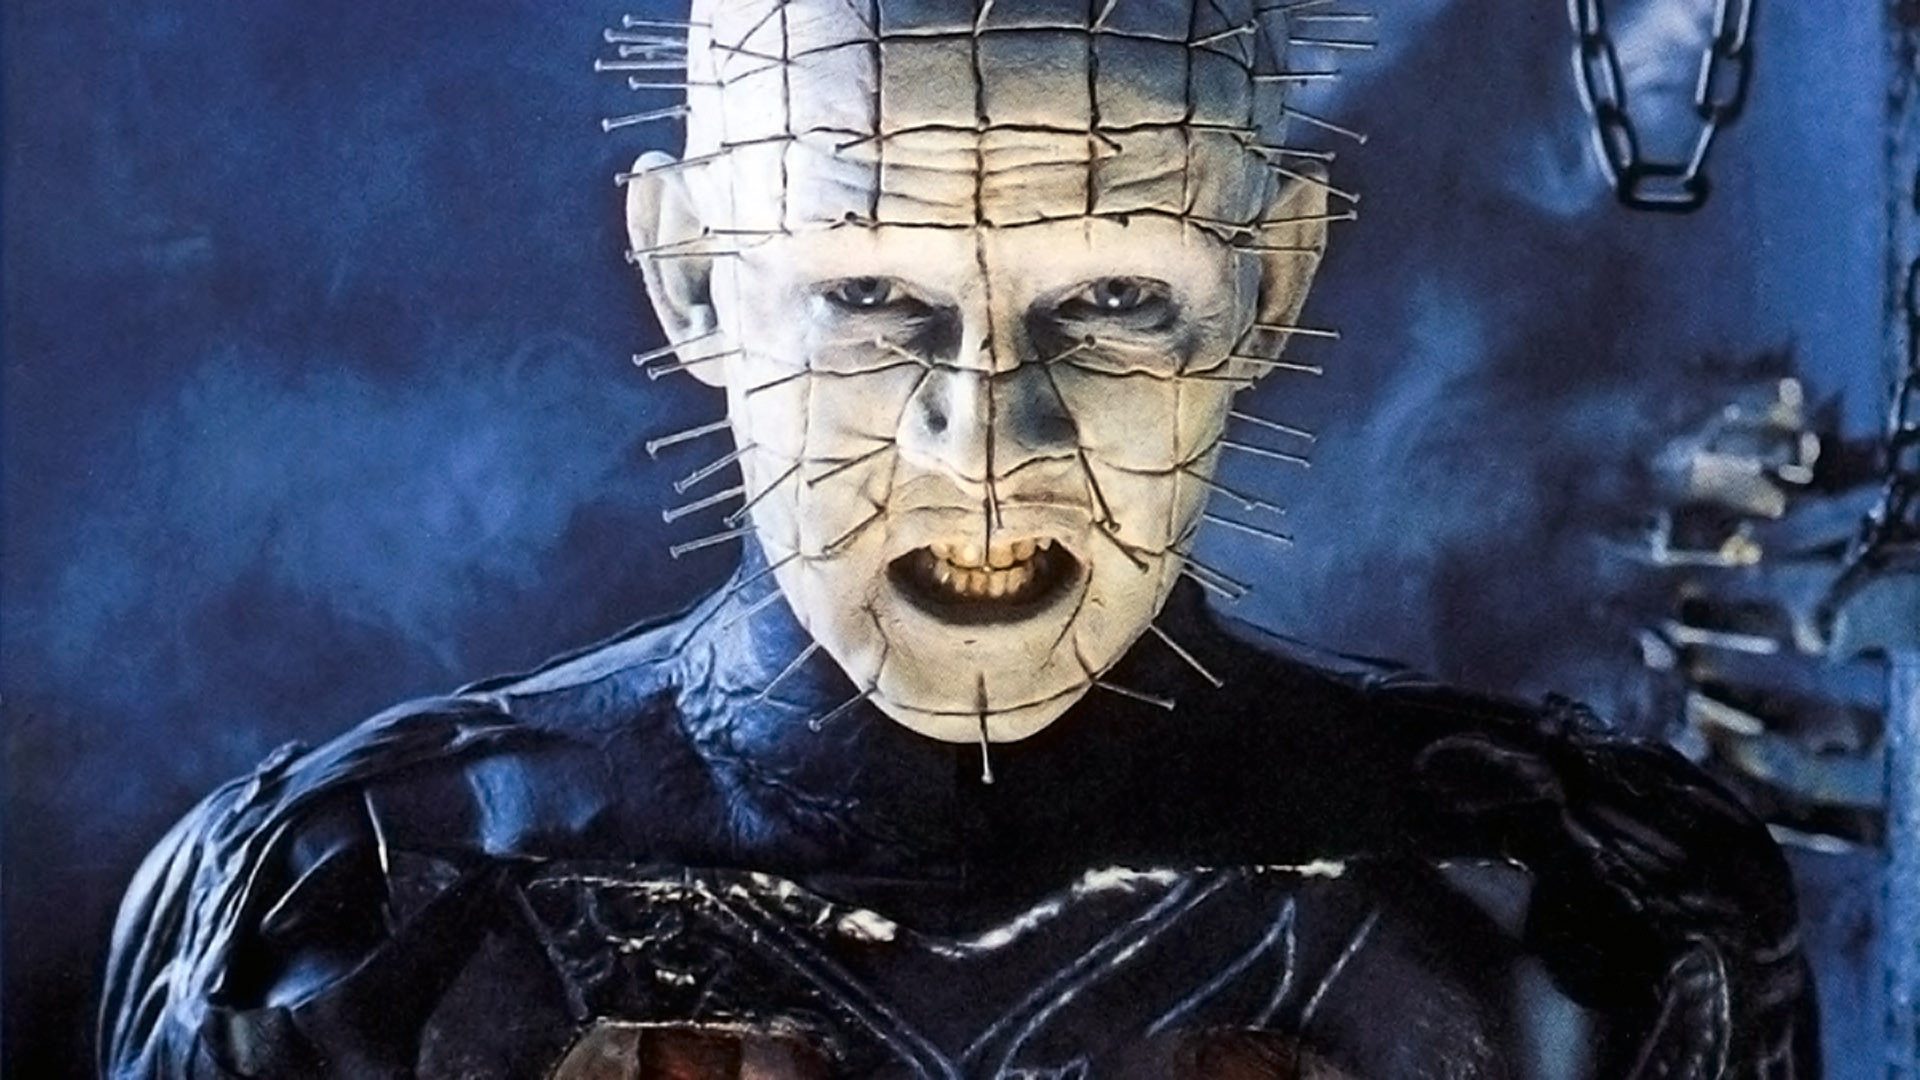 Pinhead, the ghastly white, nail-faced leader of the demonic Cenobites.